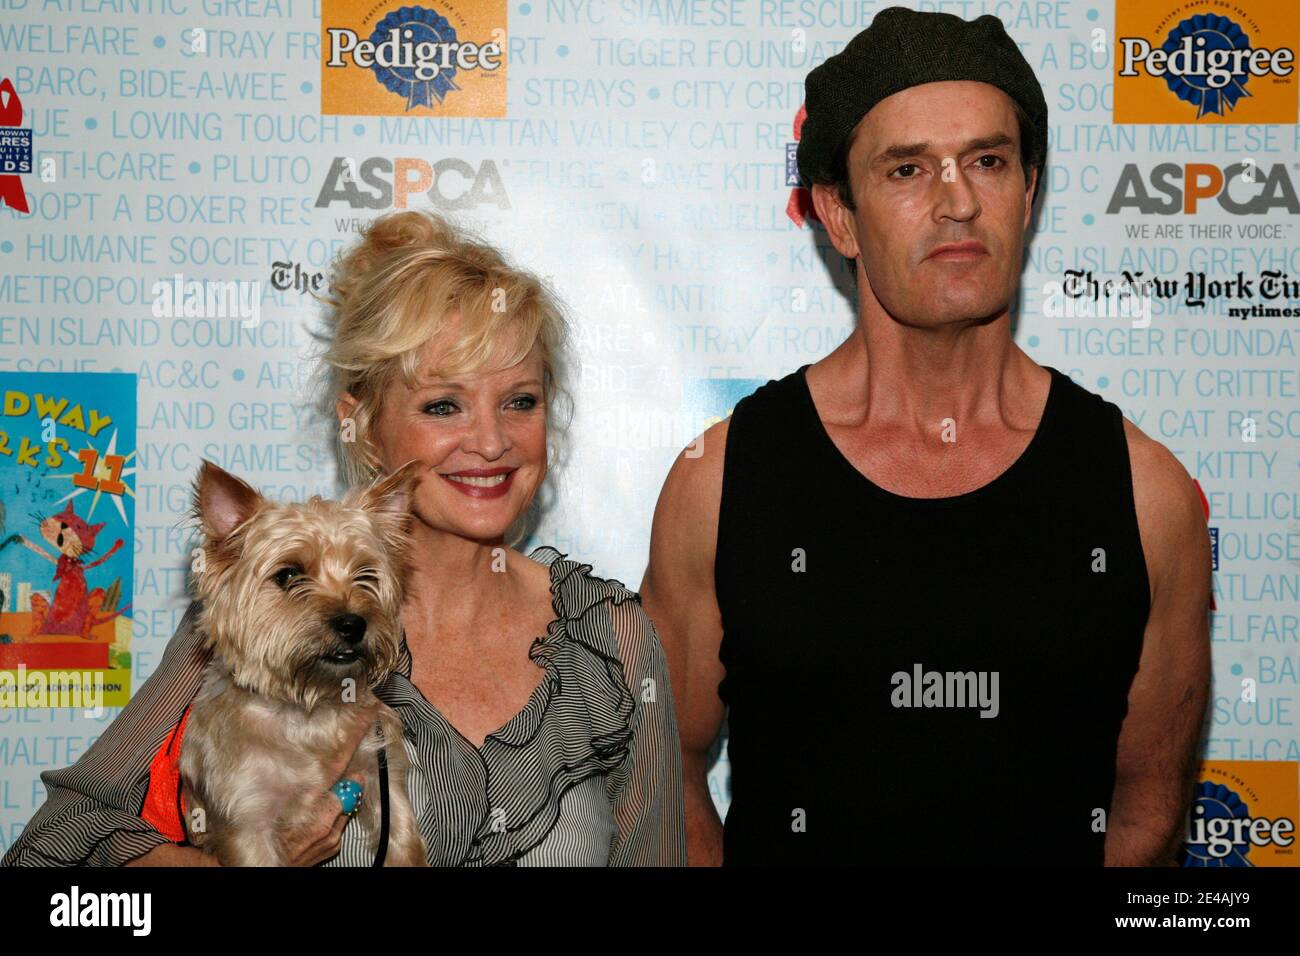 (L-R) Actors Christine Ebersole and Rupert Everett attend the 11th Annual Broadway Barks in Shubert Theatre on July 11, 2009 in New York, NY. Photo By Anton Pak/ABACAPRESS.COM (Pictured: Christine Ebersole , Rupert Everett) Stock Photo